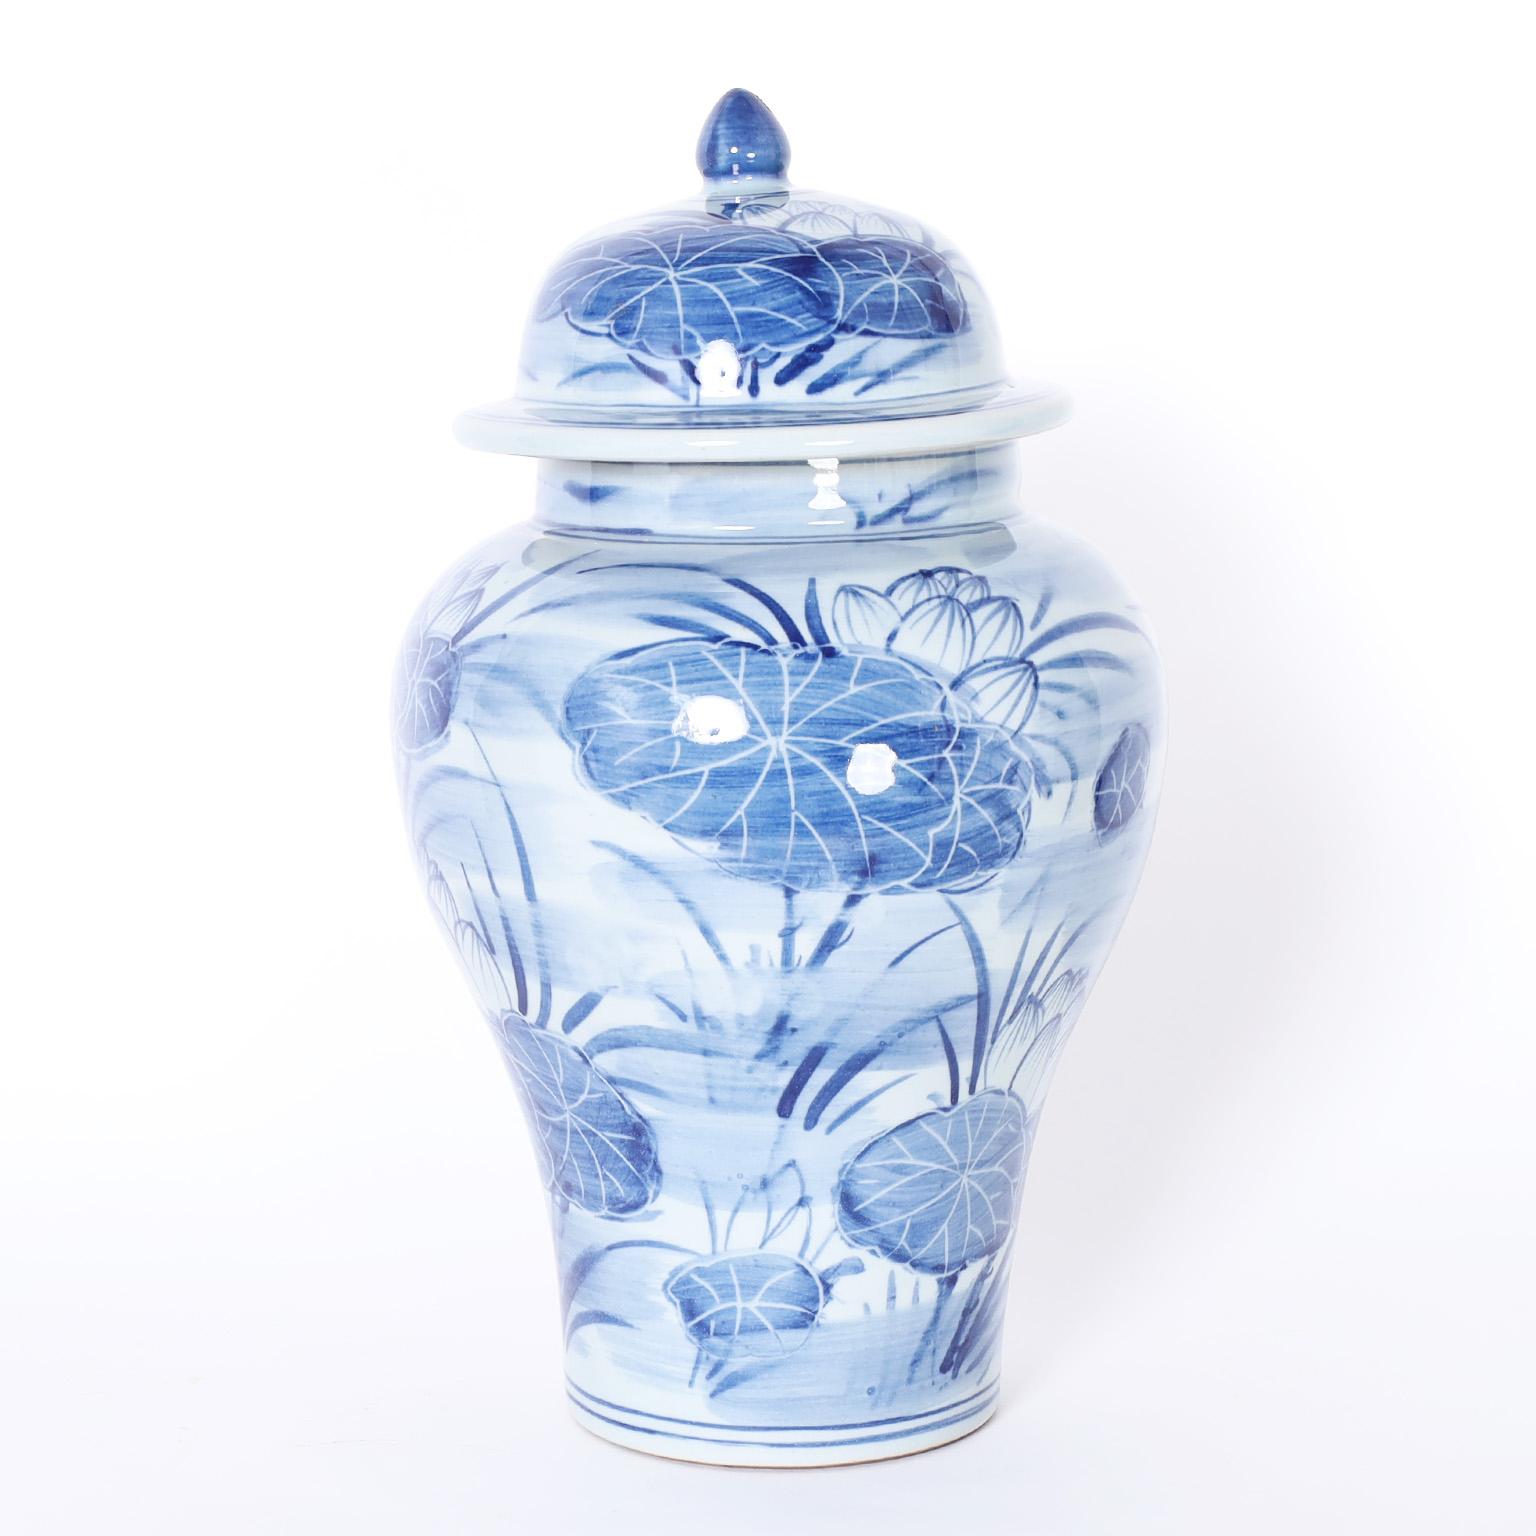 Chinese Pair of Blue and White Porcelain Lidded Ginger Jars with Water Lilies